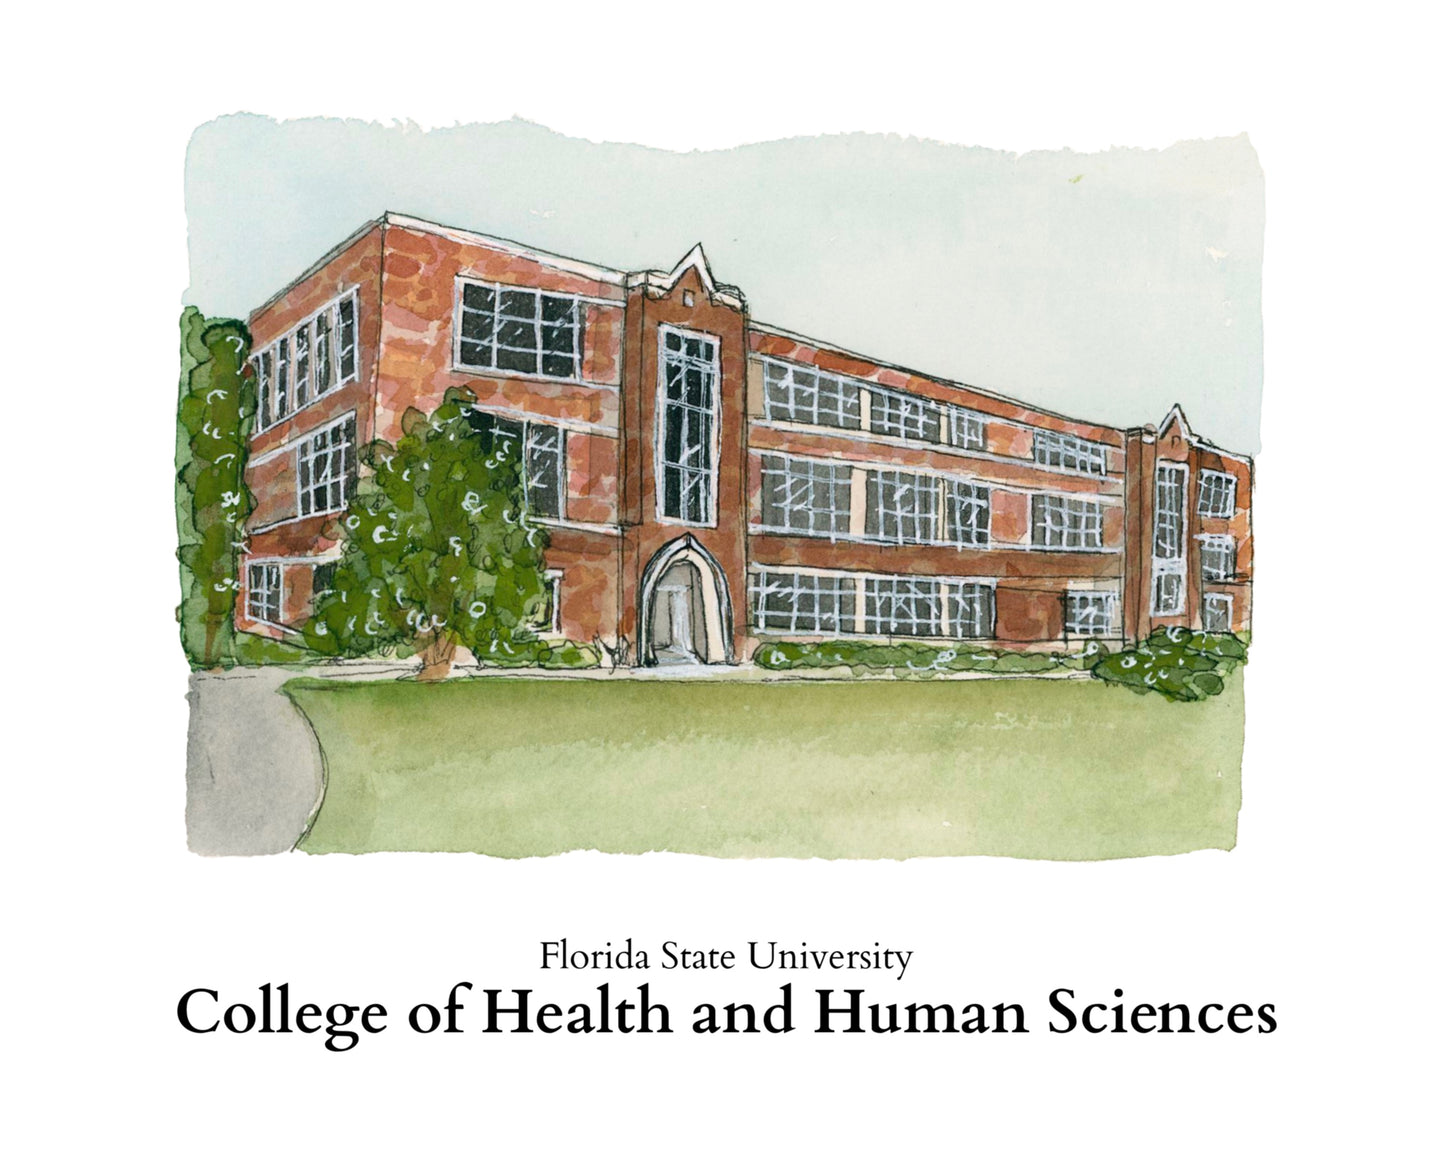 Florida State University College of Health and Human Sciences Print